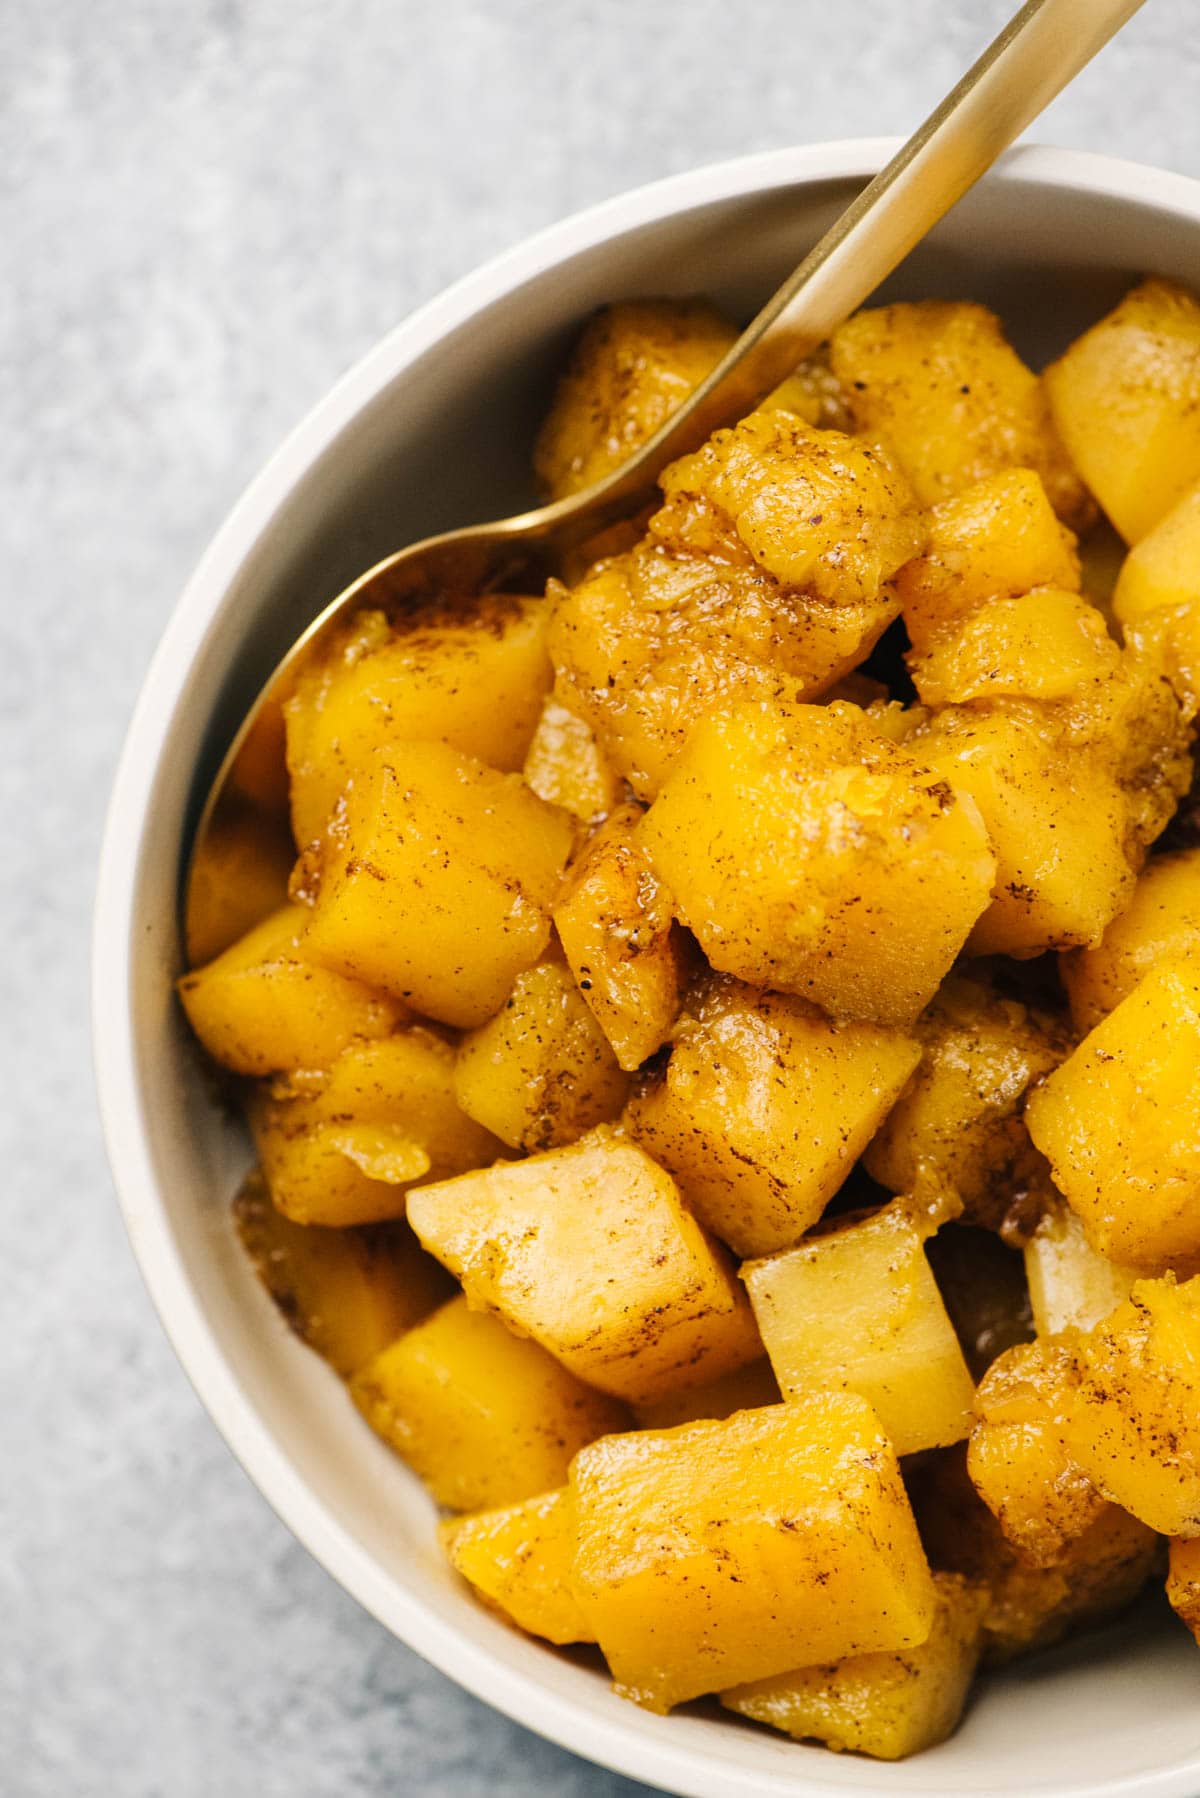 Diced pieces of slow cooker butternut squash seasoned with brown sugar and warming spices in a tan serving bowl with a gold spoon.